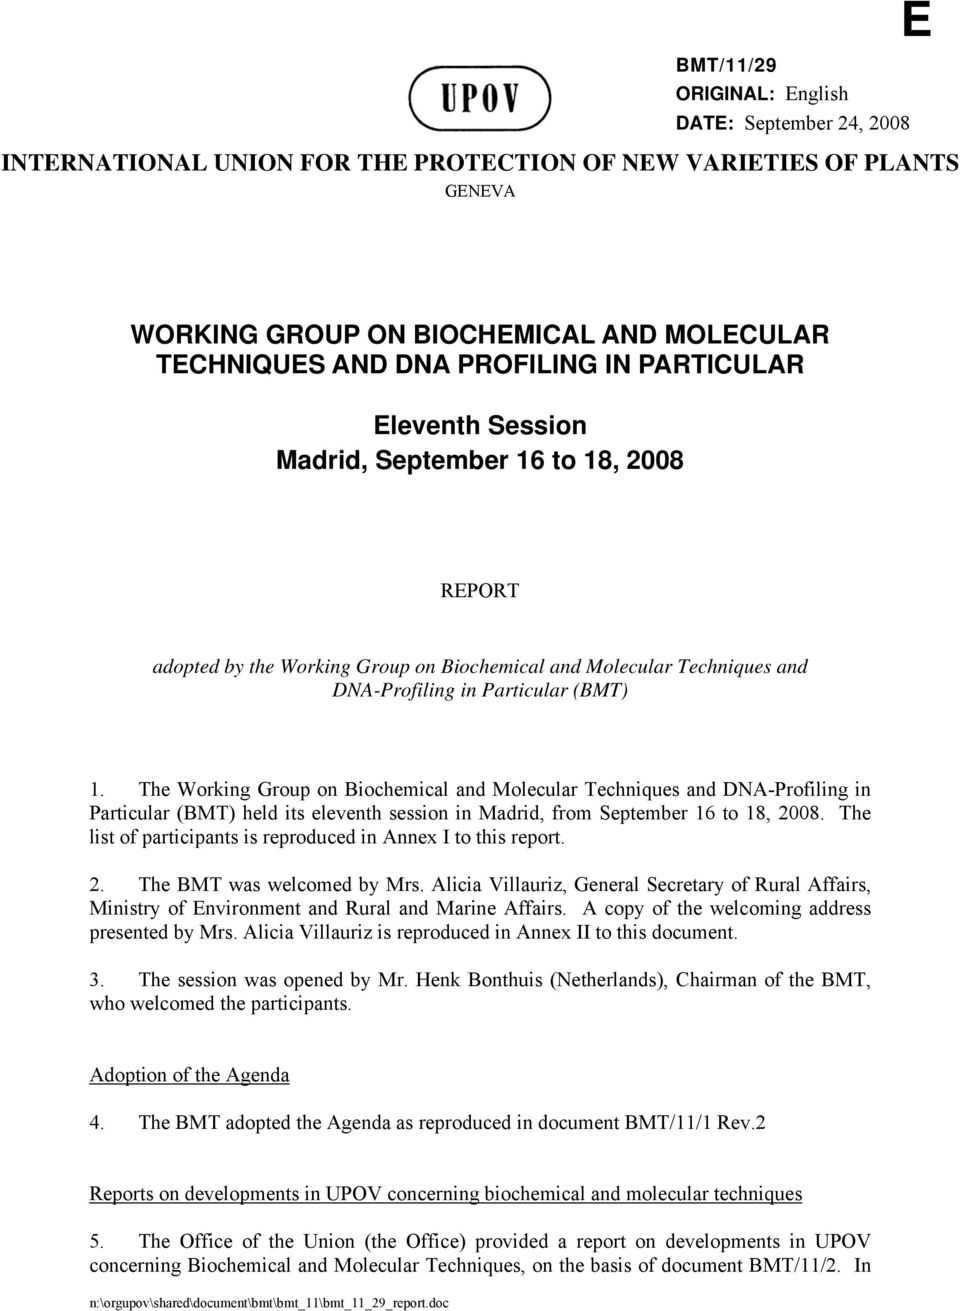 The Working Group on Biochemical and Molecular Techniques and DNA-Profiling in Particular (BMT) held its eleventh session in Madrid, from September 16 to 18, 2008.